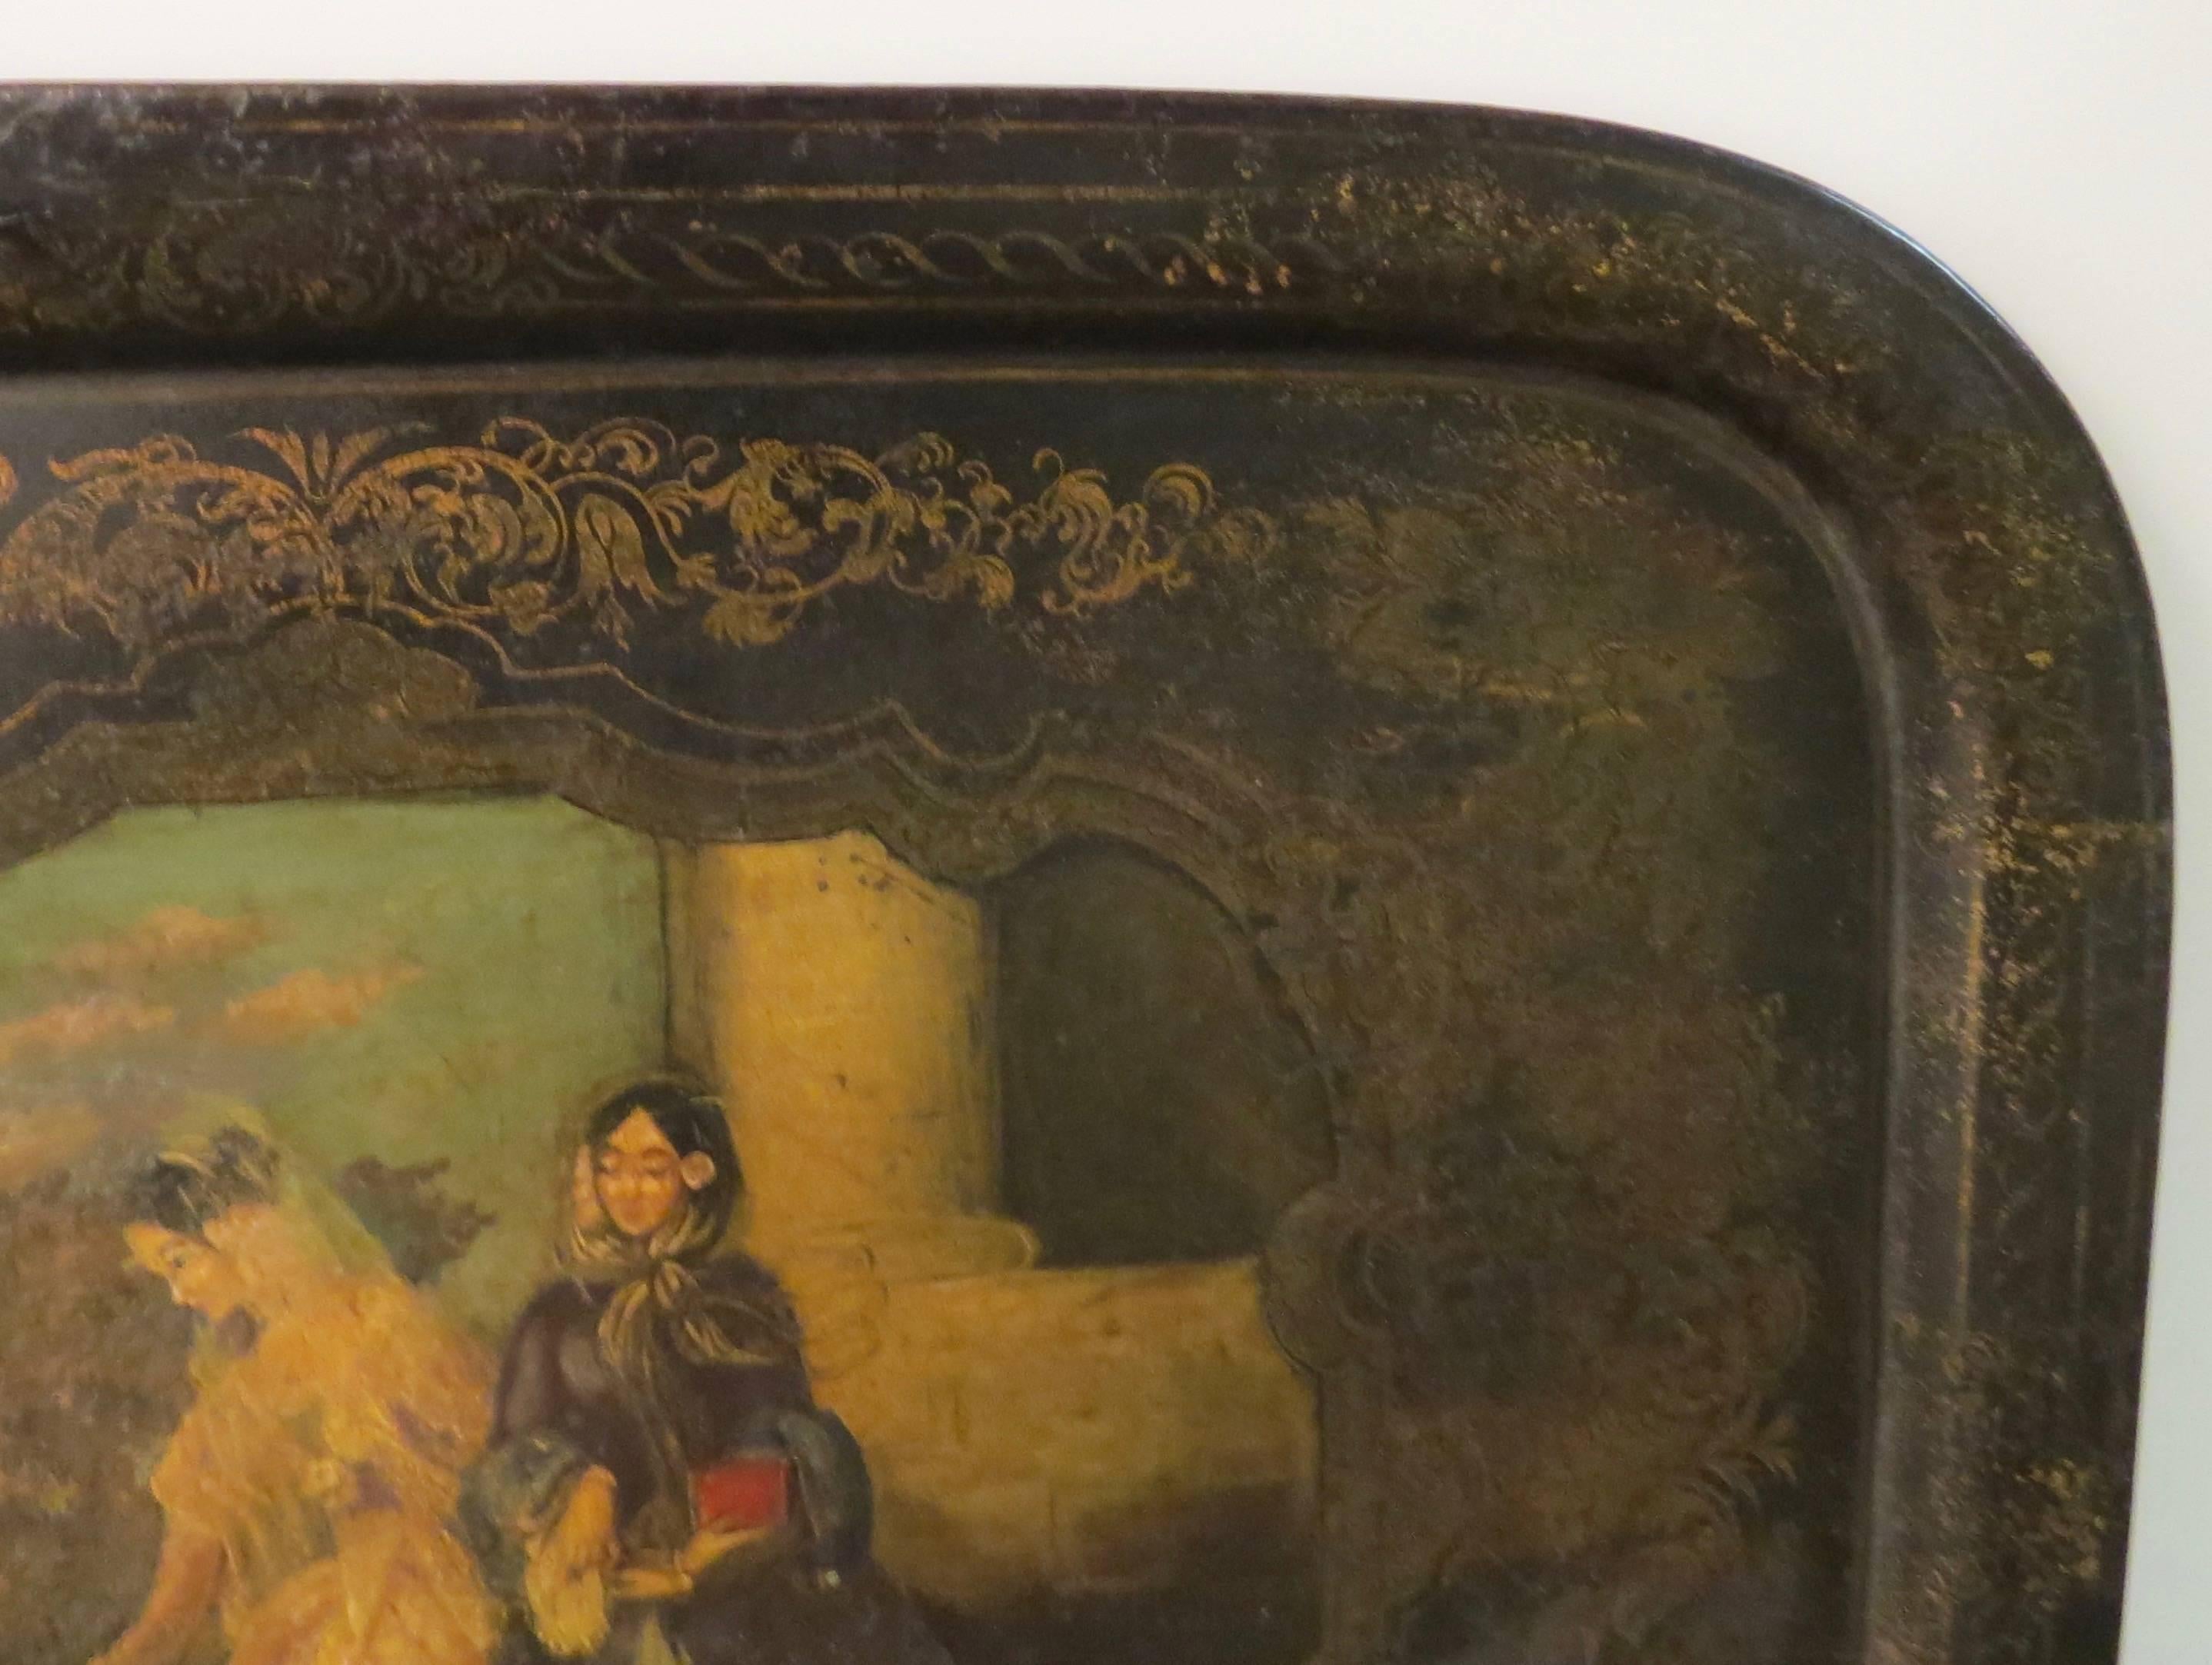 Rectangular tole tray with black background. Delicate floral border in gold. Central scene depicting two elegant ladies offering a donation to a kneeling man, 19th century origin. Painting is in good condition, perhaps it has been well cleaned or